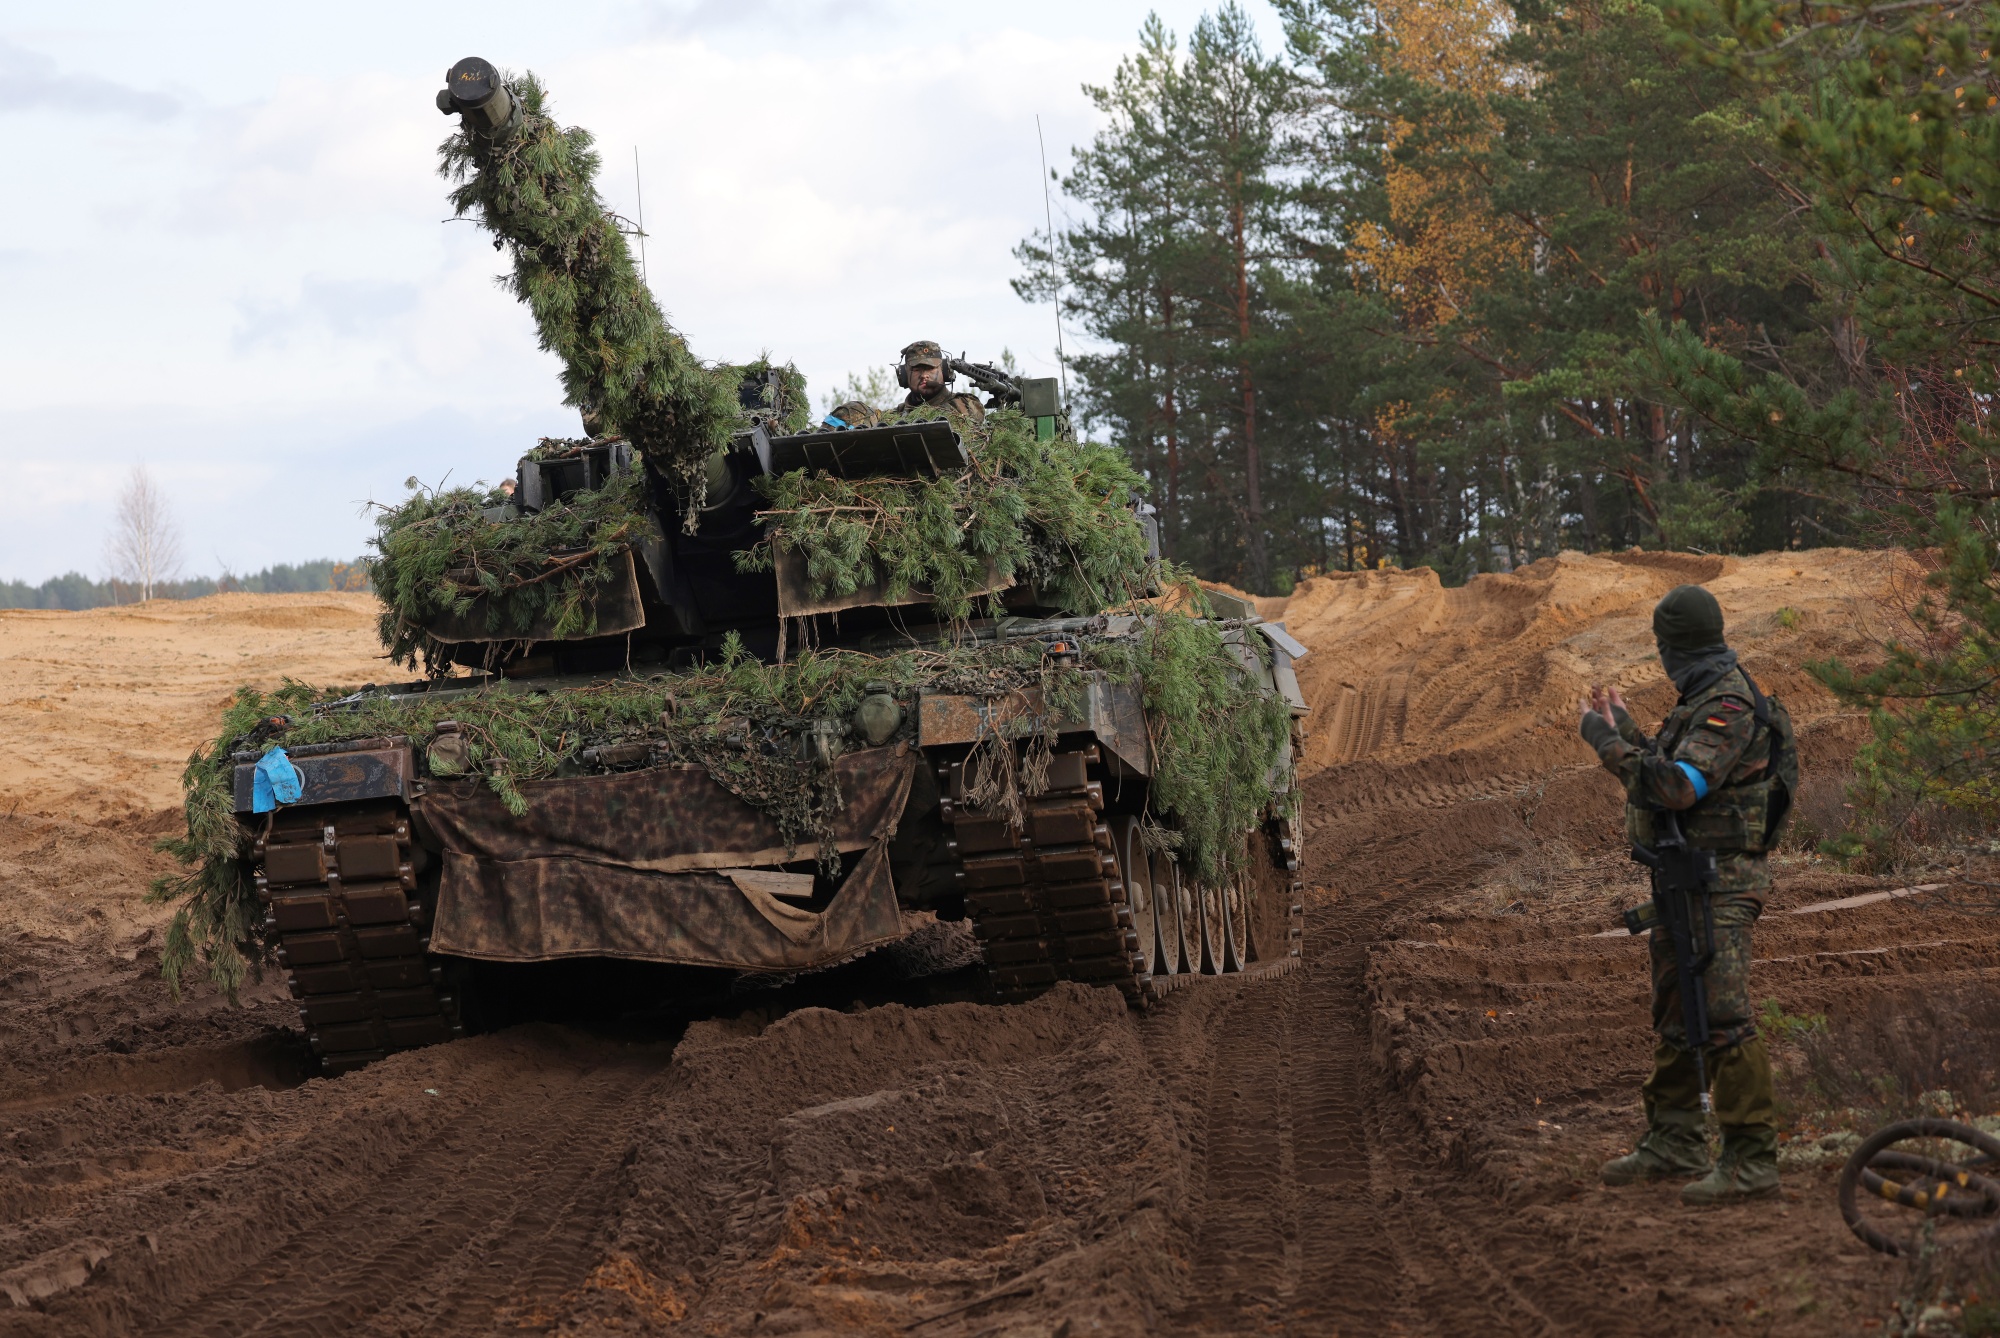 Germany will decide in the coming days on deliveries of Leopard 2 tanks to Ukraine